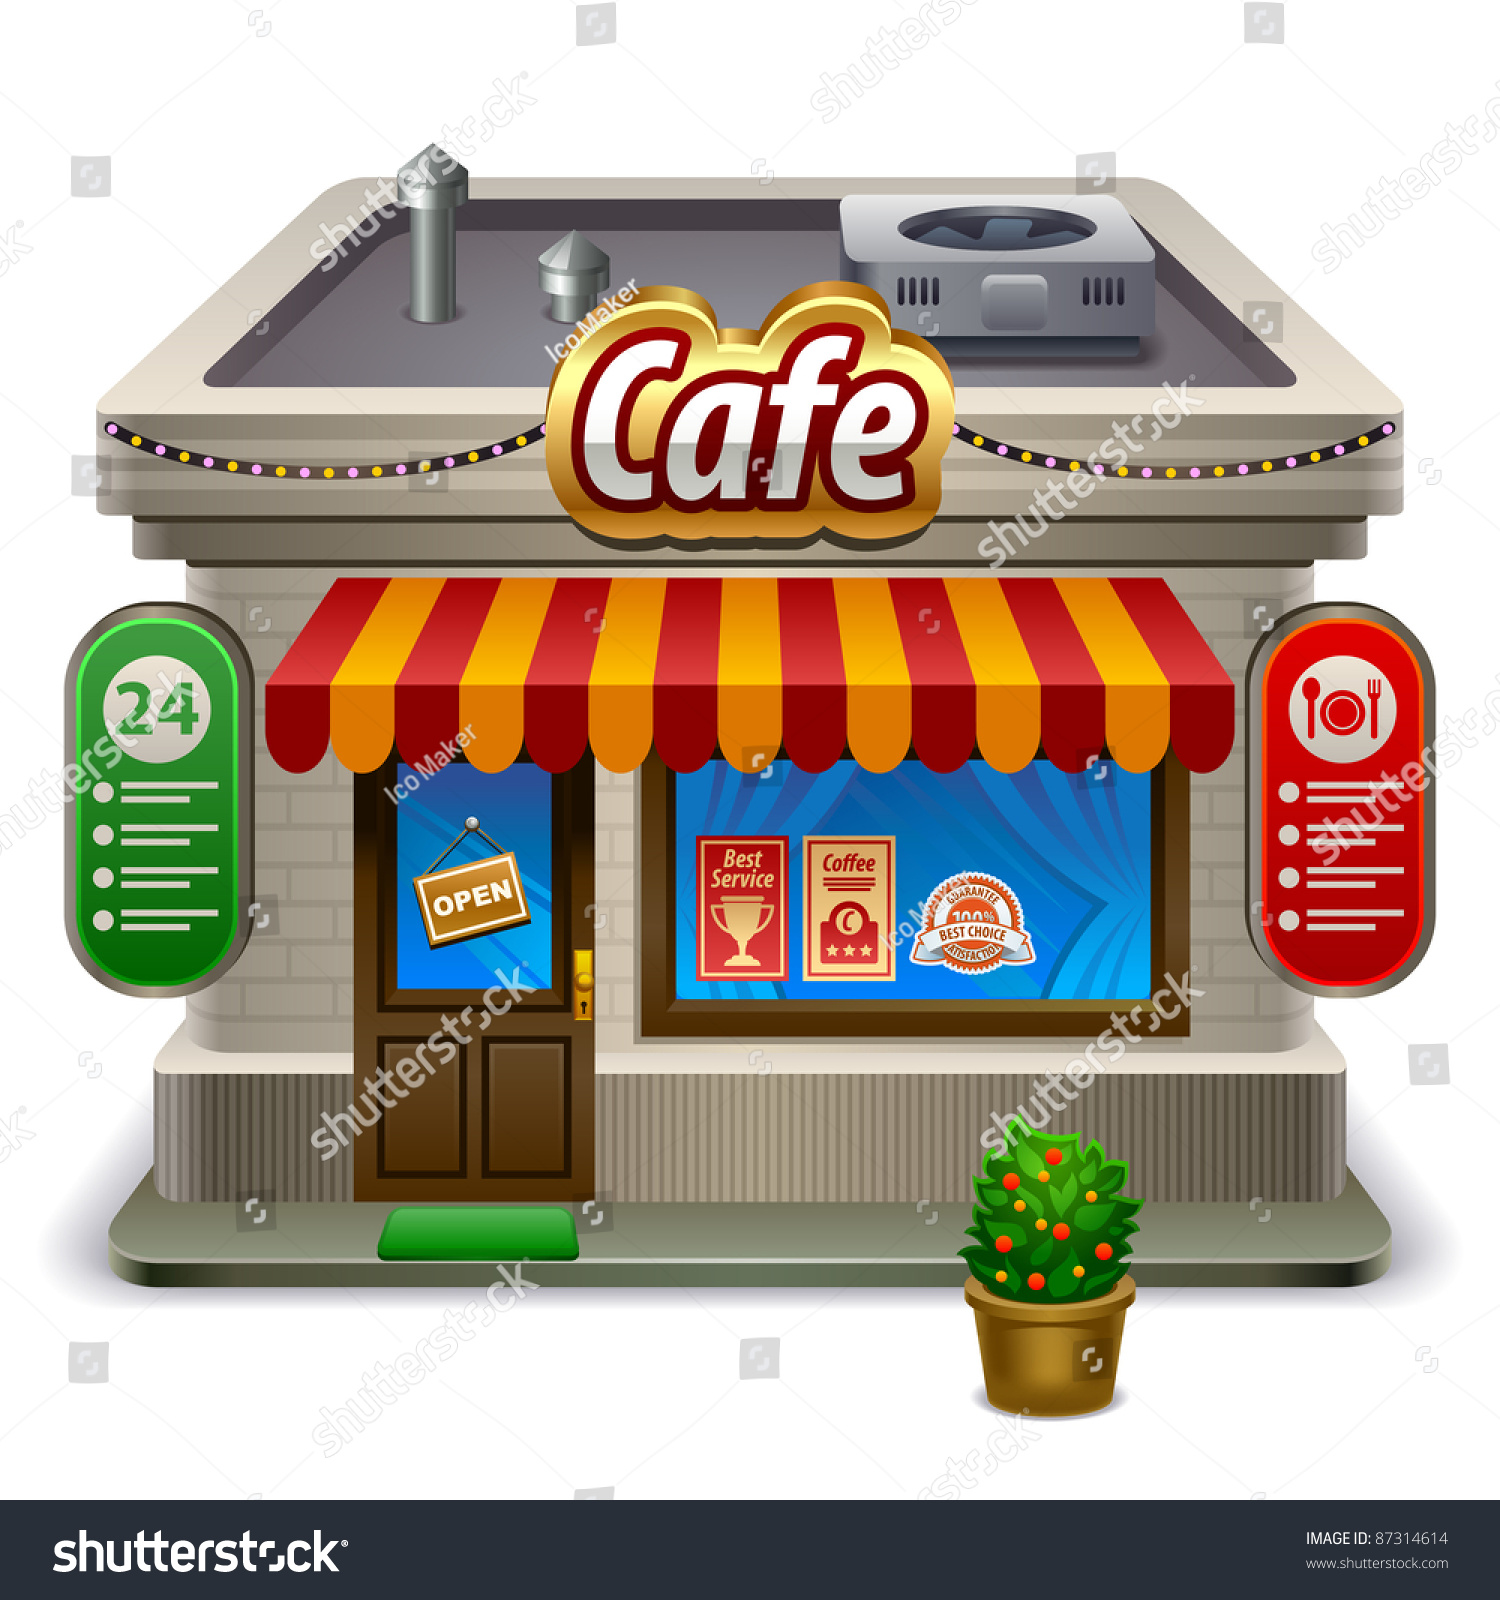 cafe food clipart - photo #9